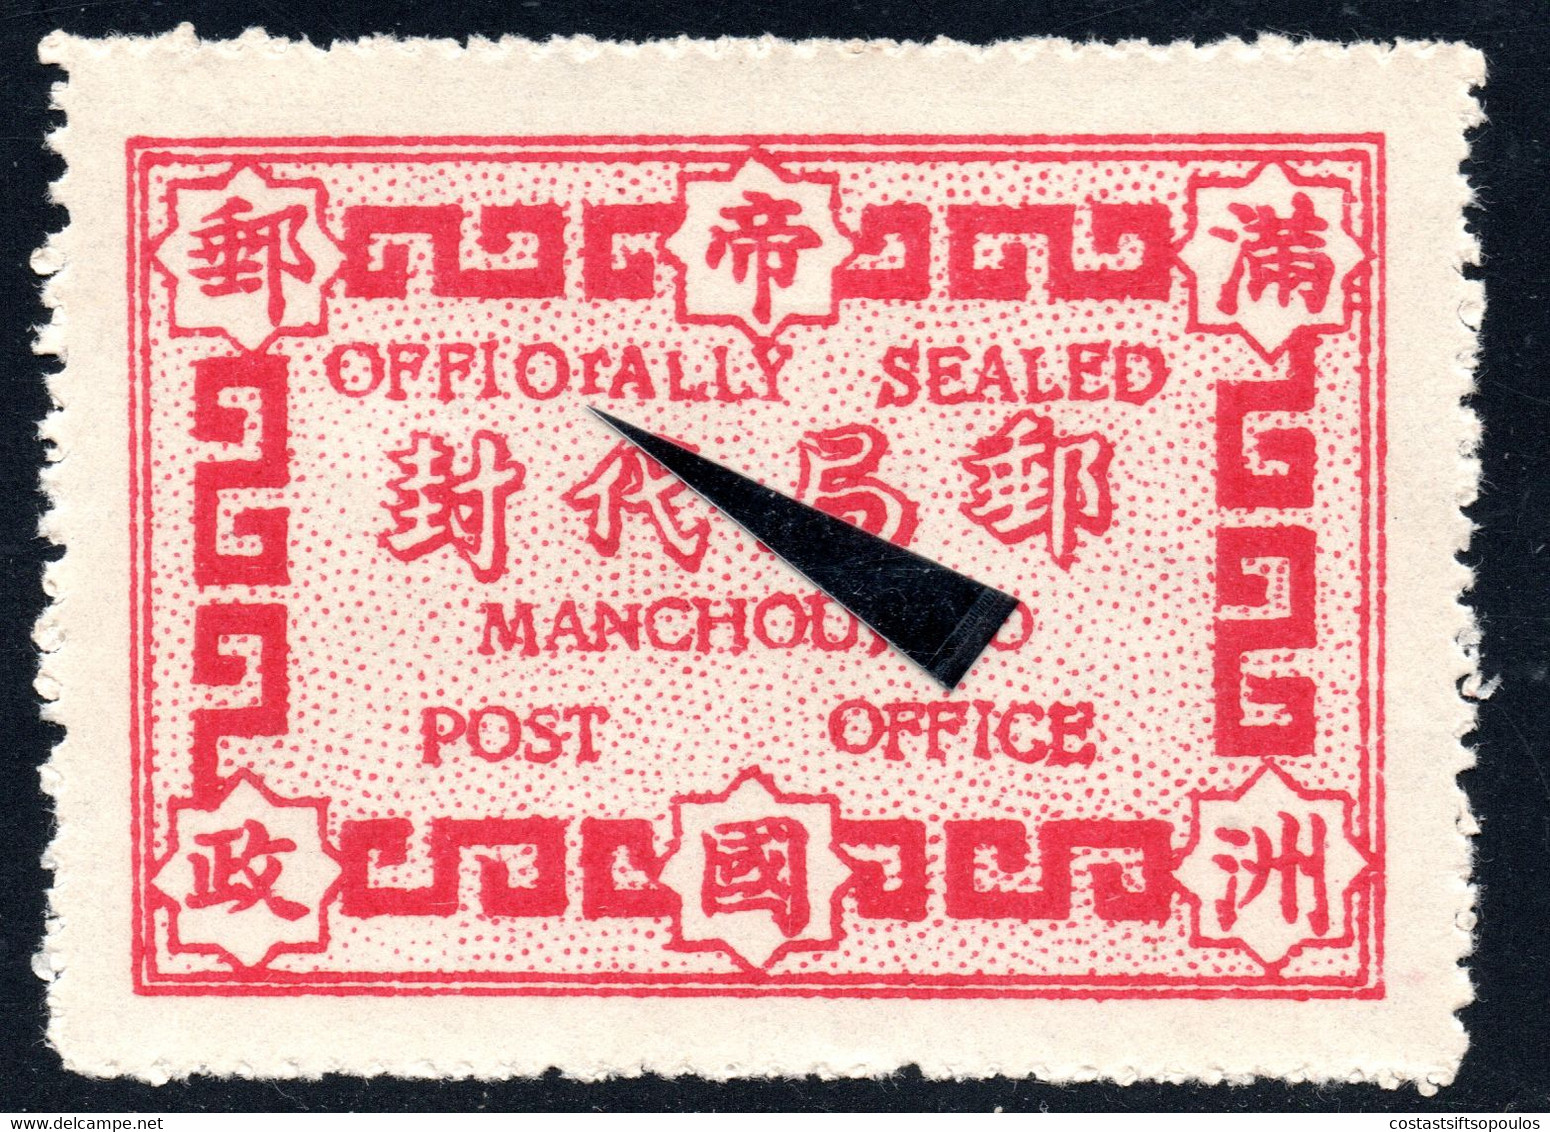 837.CHINA,JAPAN,MANCHUKUO.OFFICIALY SEALED LABEL,CLOSED C VARIETY,WITHOUT GUM. - 1932-45  Mandschurei (Mandschukuo)